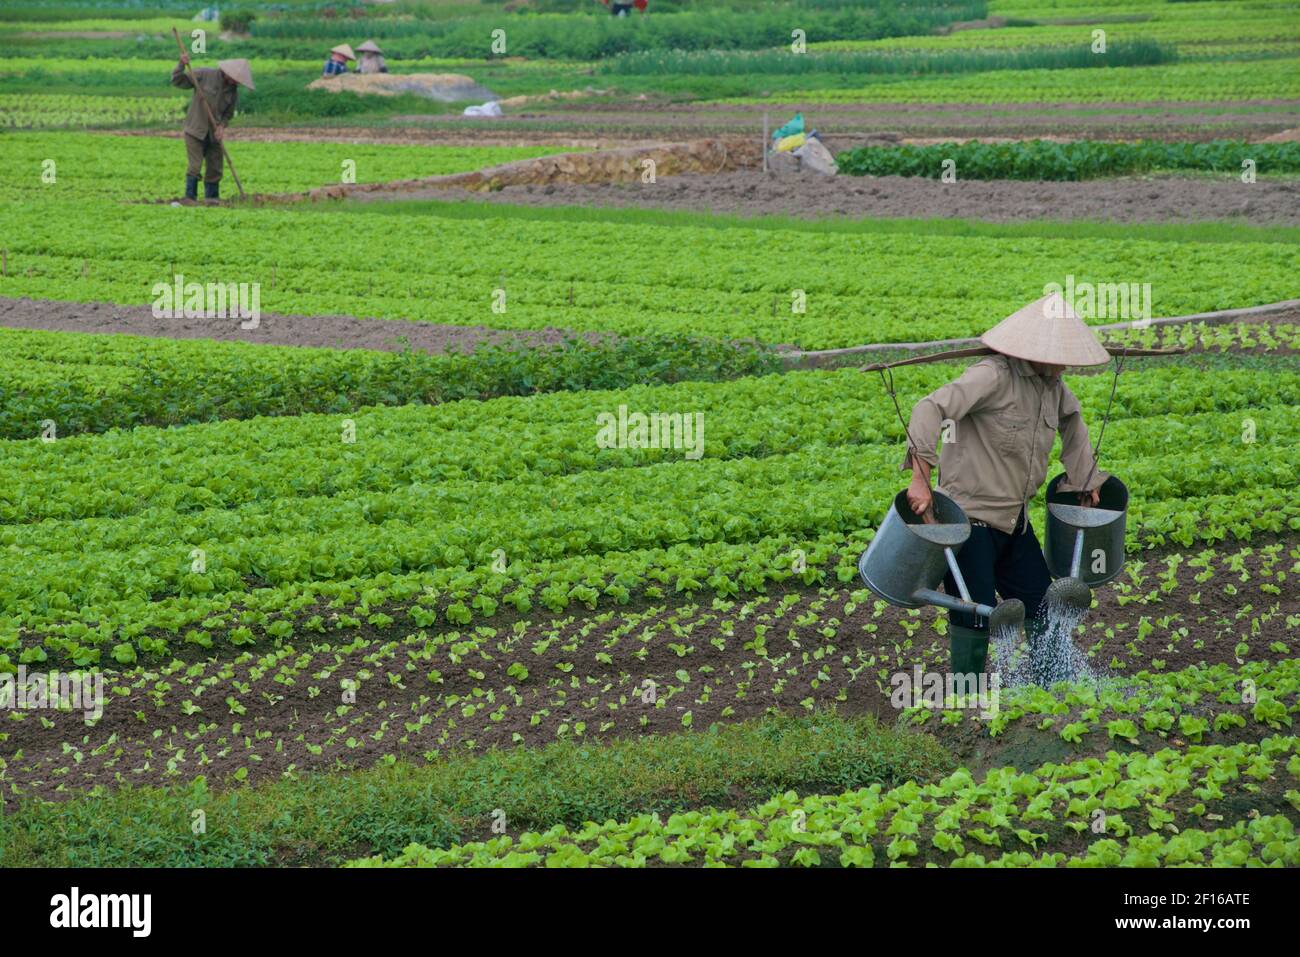 Vietnamese horticulture in the Red River Delta, Vietnam Stock Photo